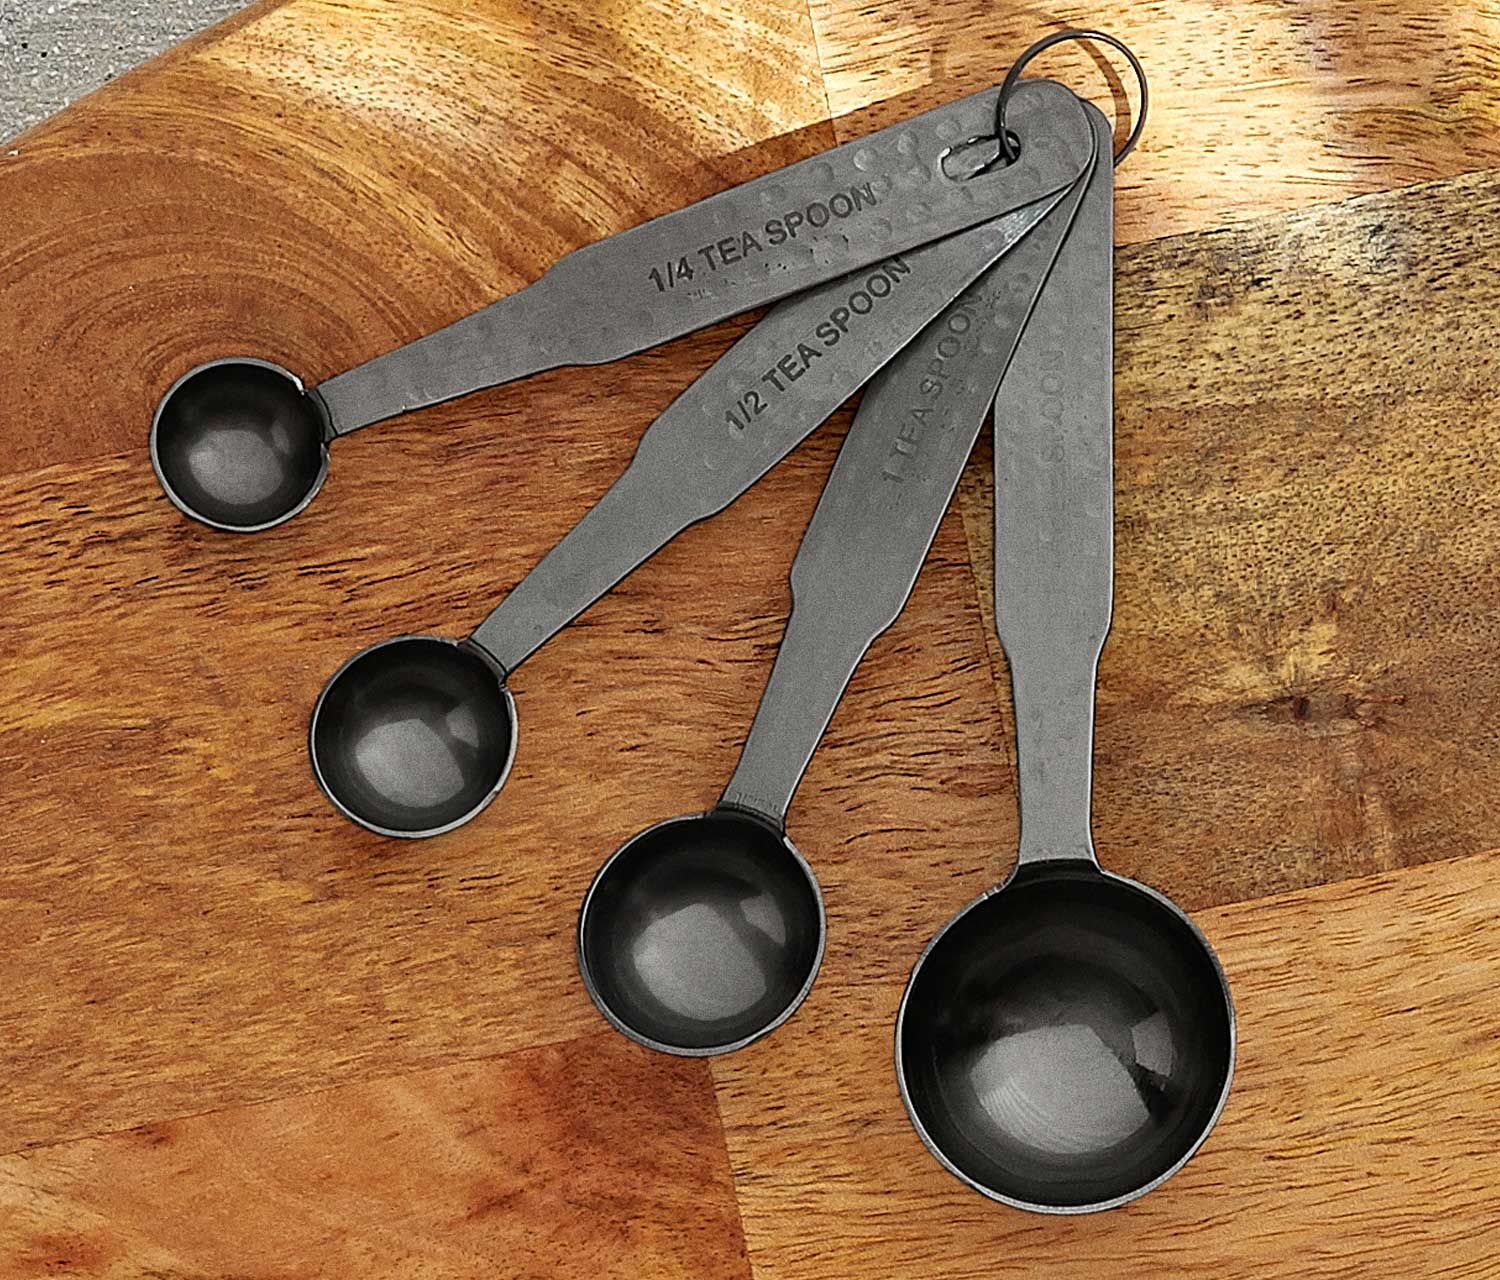 Modern Hammered Gun Metal Stainless Steel Measuring Cups and Spoons